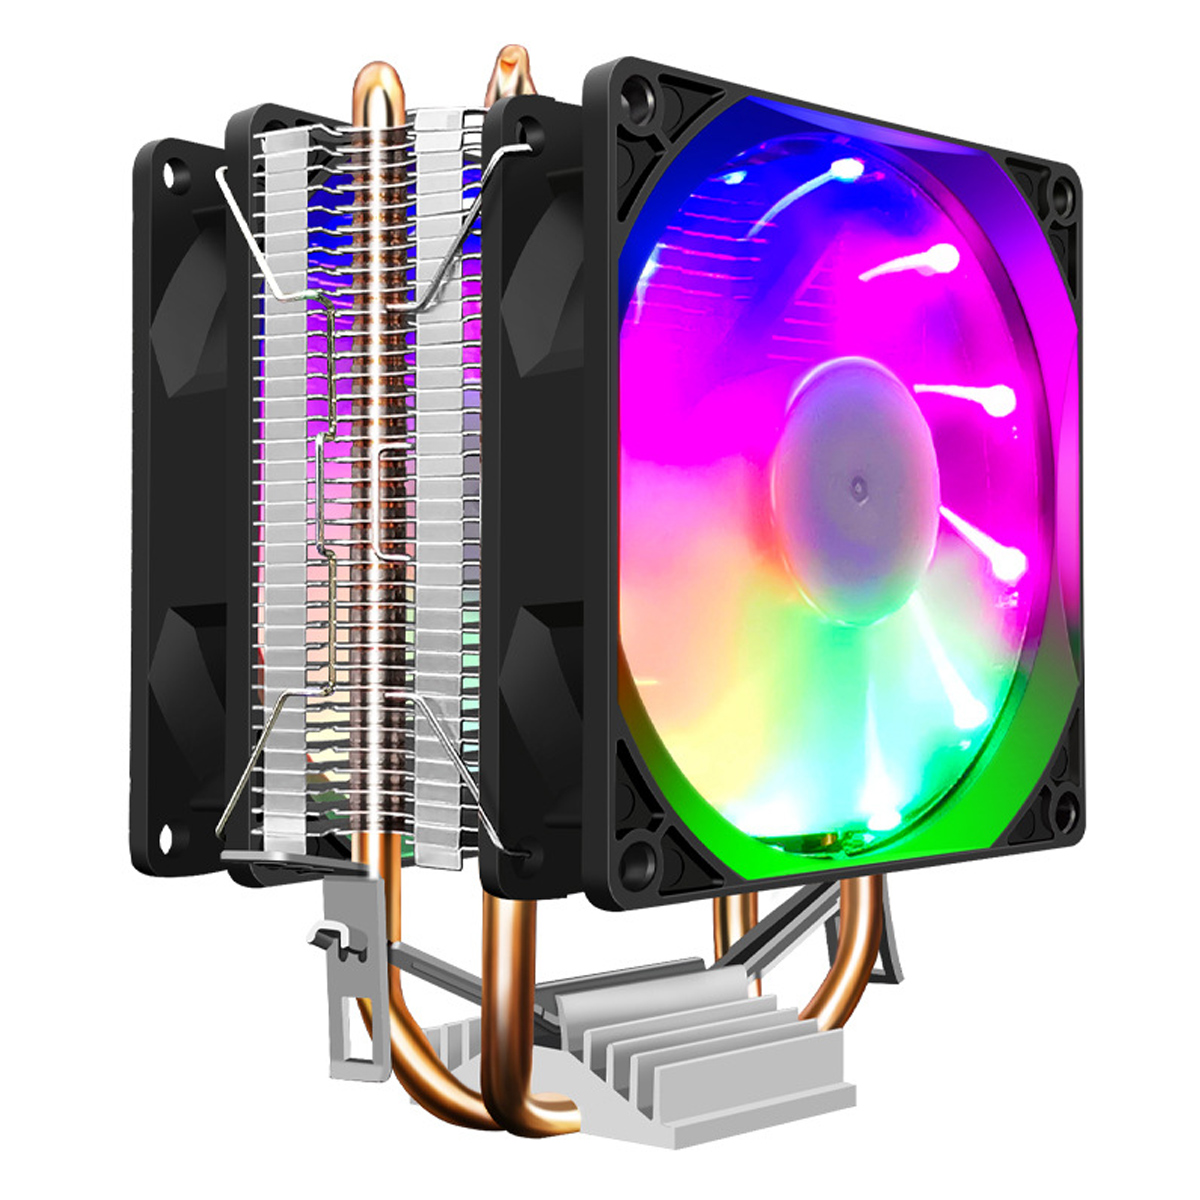 COOLMOON Frost P2 Dual Copper Heat Pipes CPU Cooling Fan RGB Fan Support Intel and AMD Mainstream Platforms